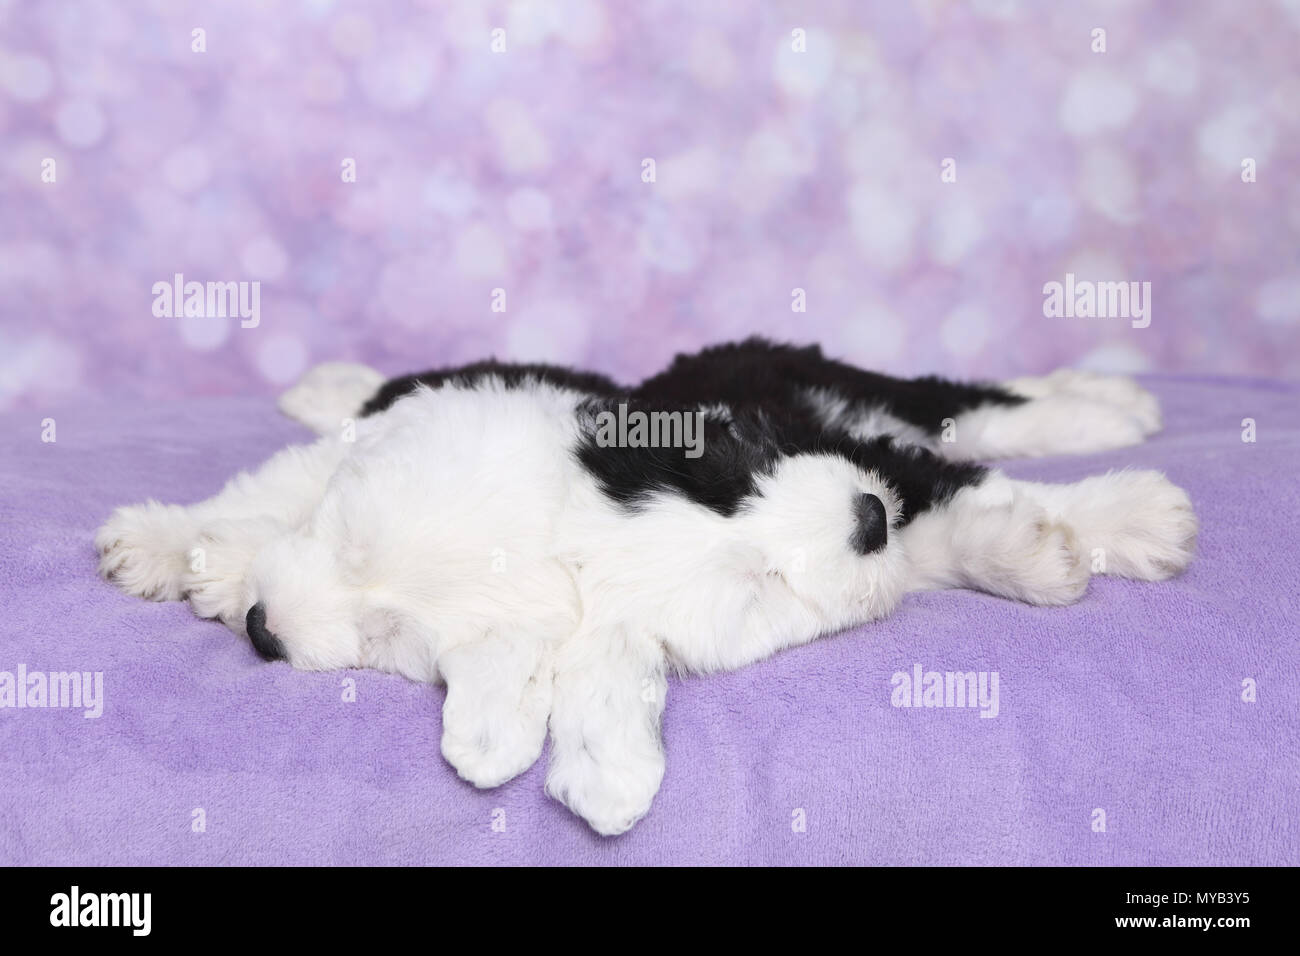 Old English Sheepdog. Two puppies sleeping on a purple blanket. Studio picture against a purple background. Germany Stock Photo